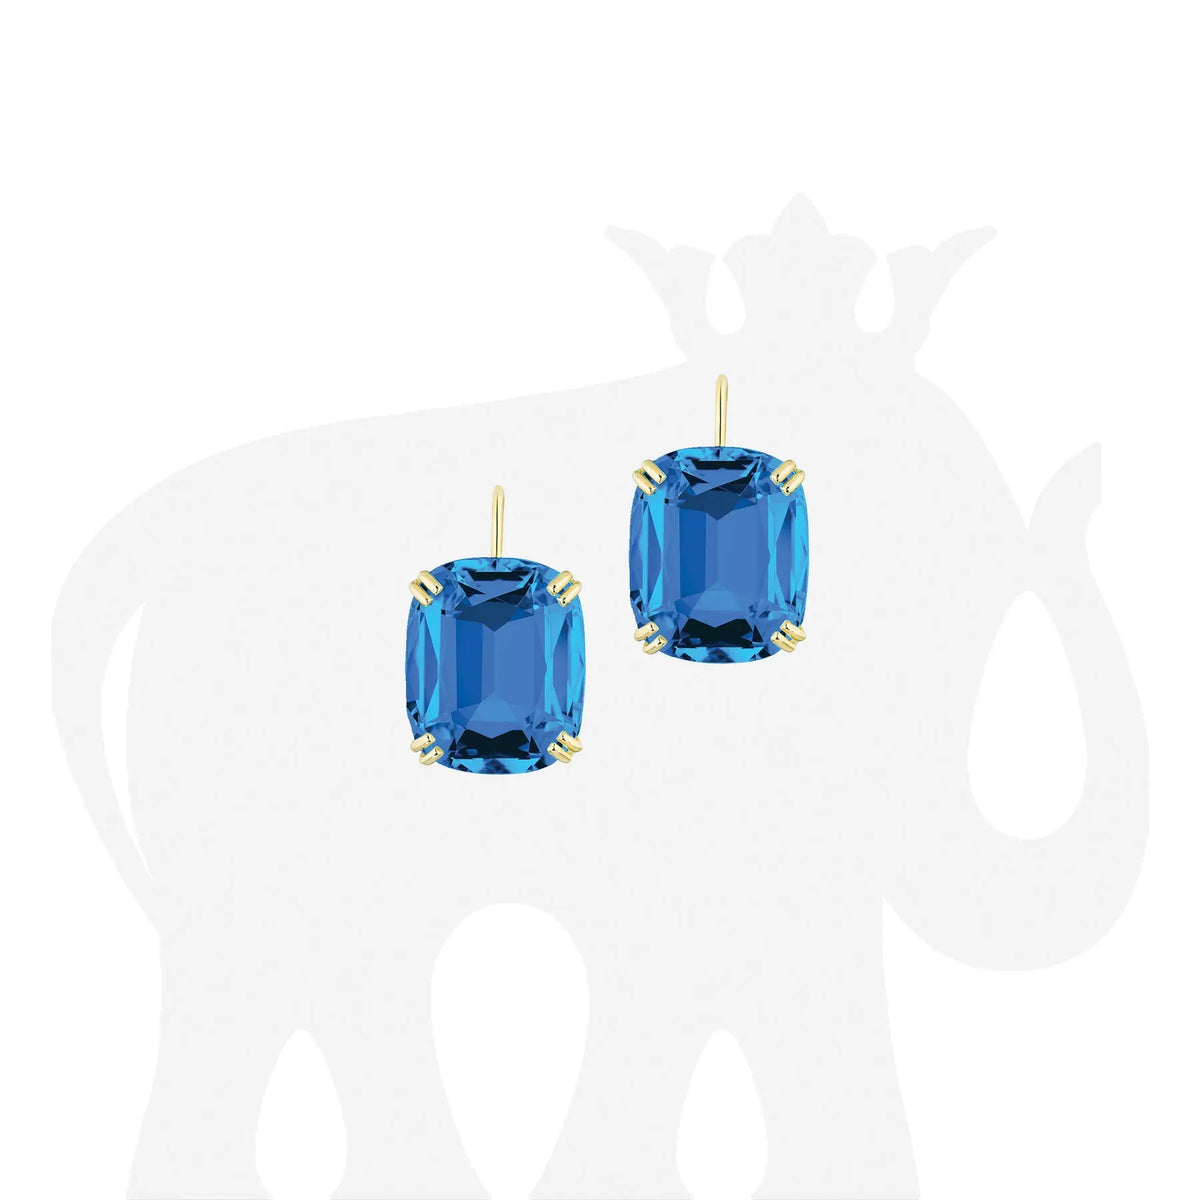 Gossip&#39; London Blue Topaz Cushion Earrings on Wire. The earrings are gorgeous. They are set in 18k yellow gold. The stones measure ~ 18x15mm and carat weight is ~29.05 ctts